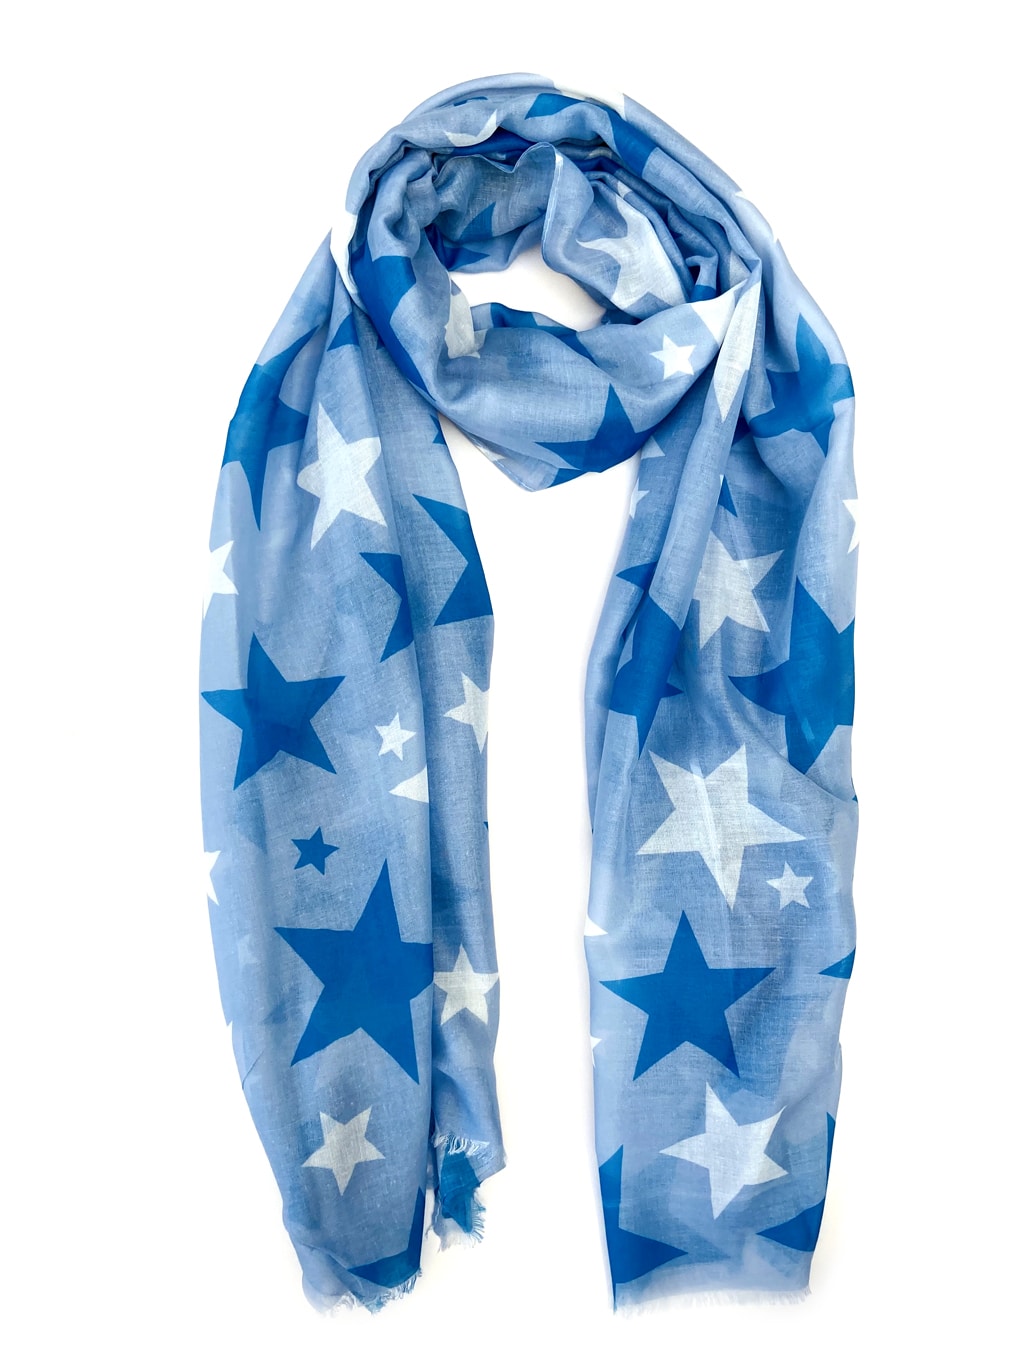 Blue scarf with large stars full length